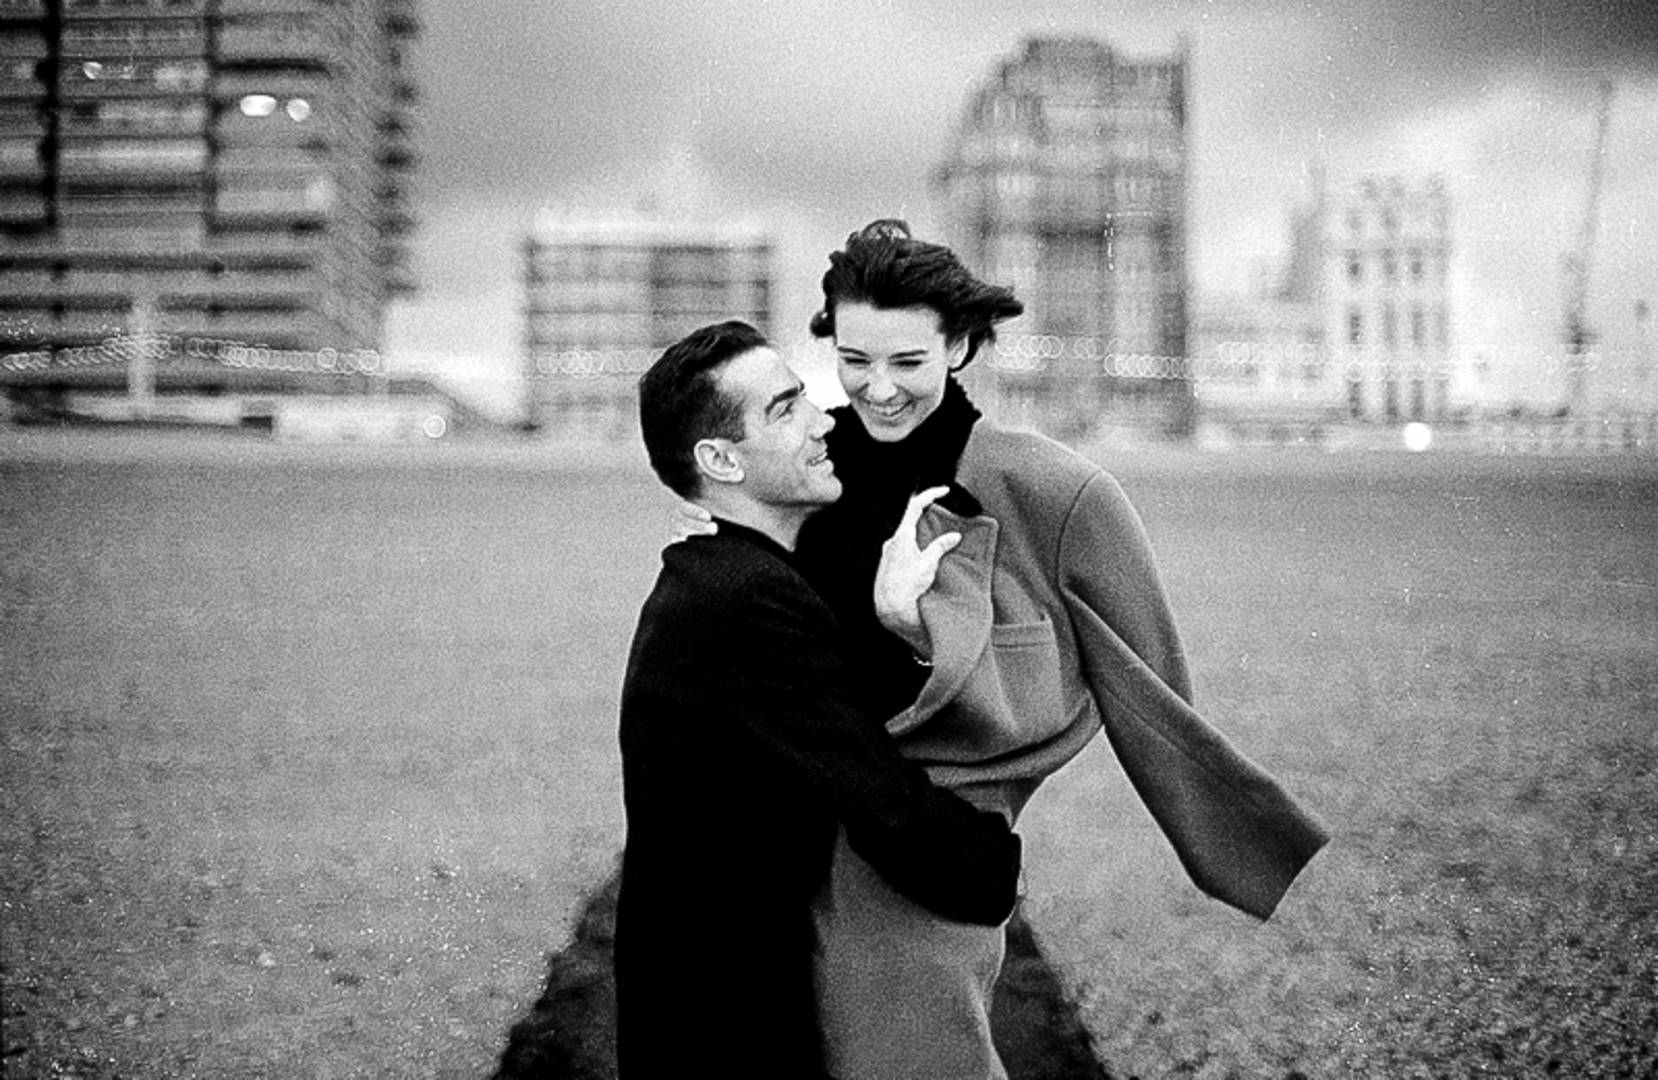 The sudden yet belated commercial success of Robert Doisneau’s ‘Hotel de Ville’ image propelled me into producing a series of romantic images that were used for postcards or posters. Ironically, despite resisting my Dad’s practical wisdom, it proved to be an excellent rehearsal for later wedding work. Nikon FE2 & 85mm f/2 Nikkor